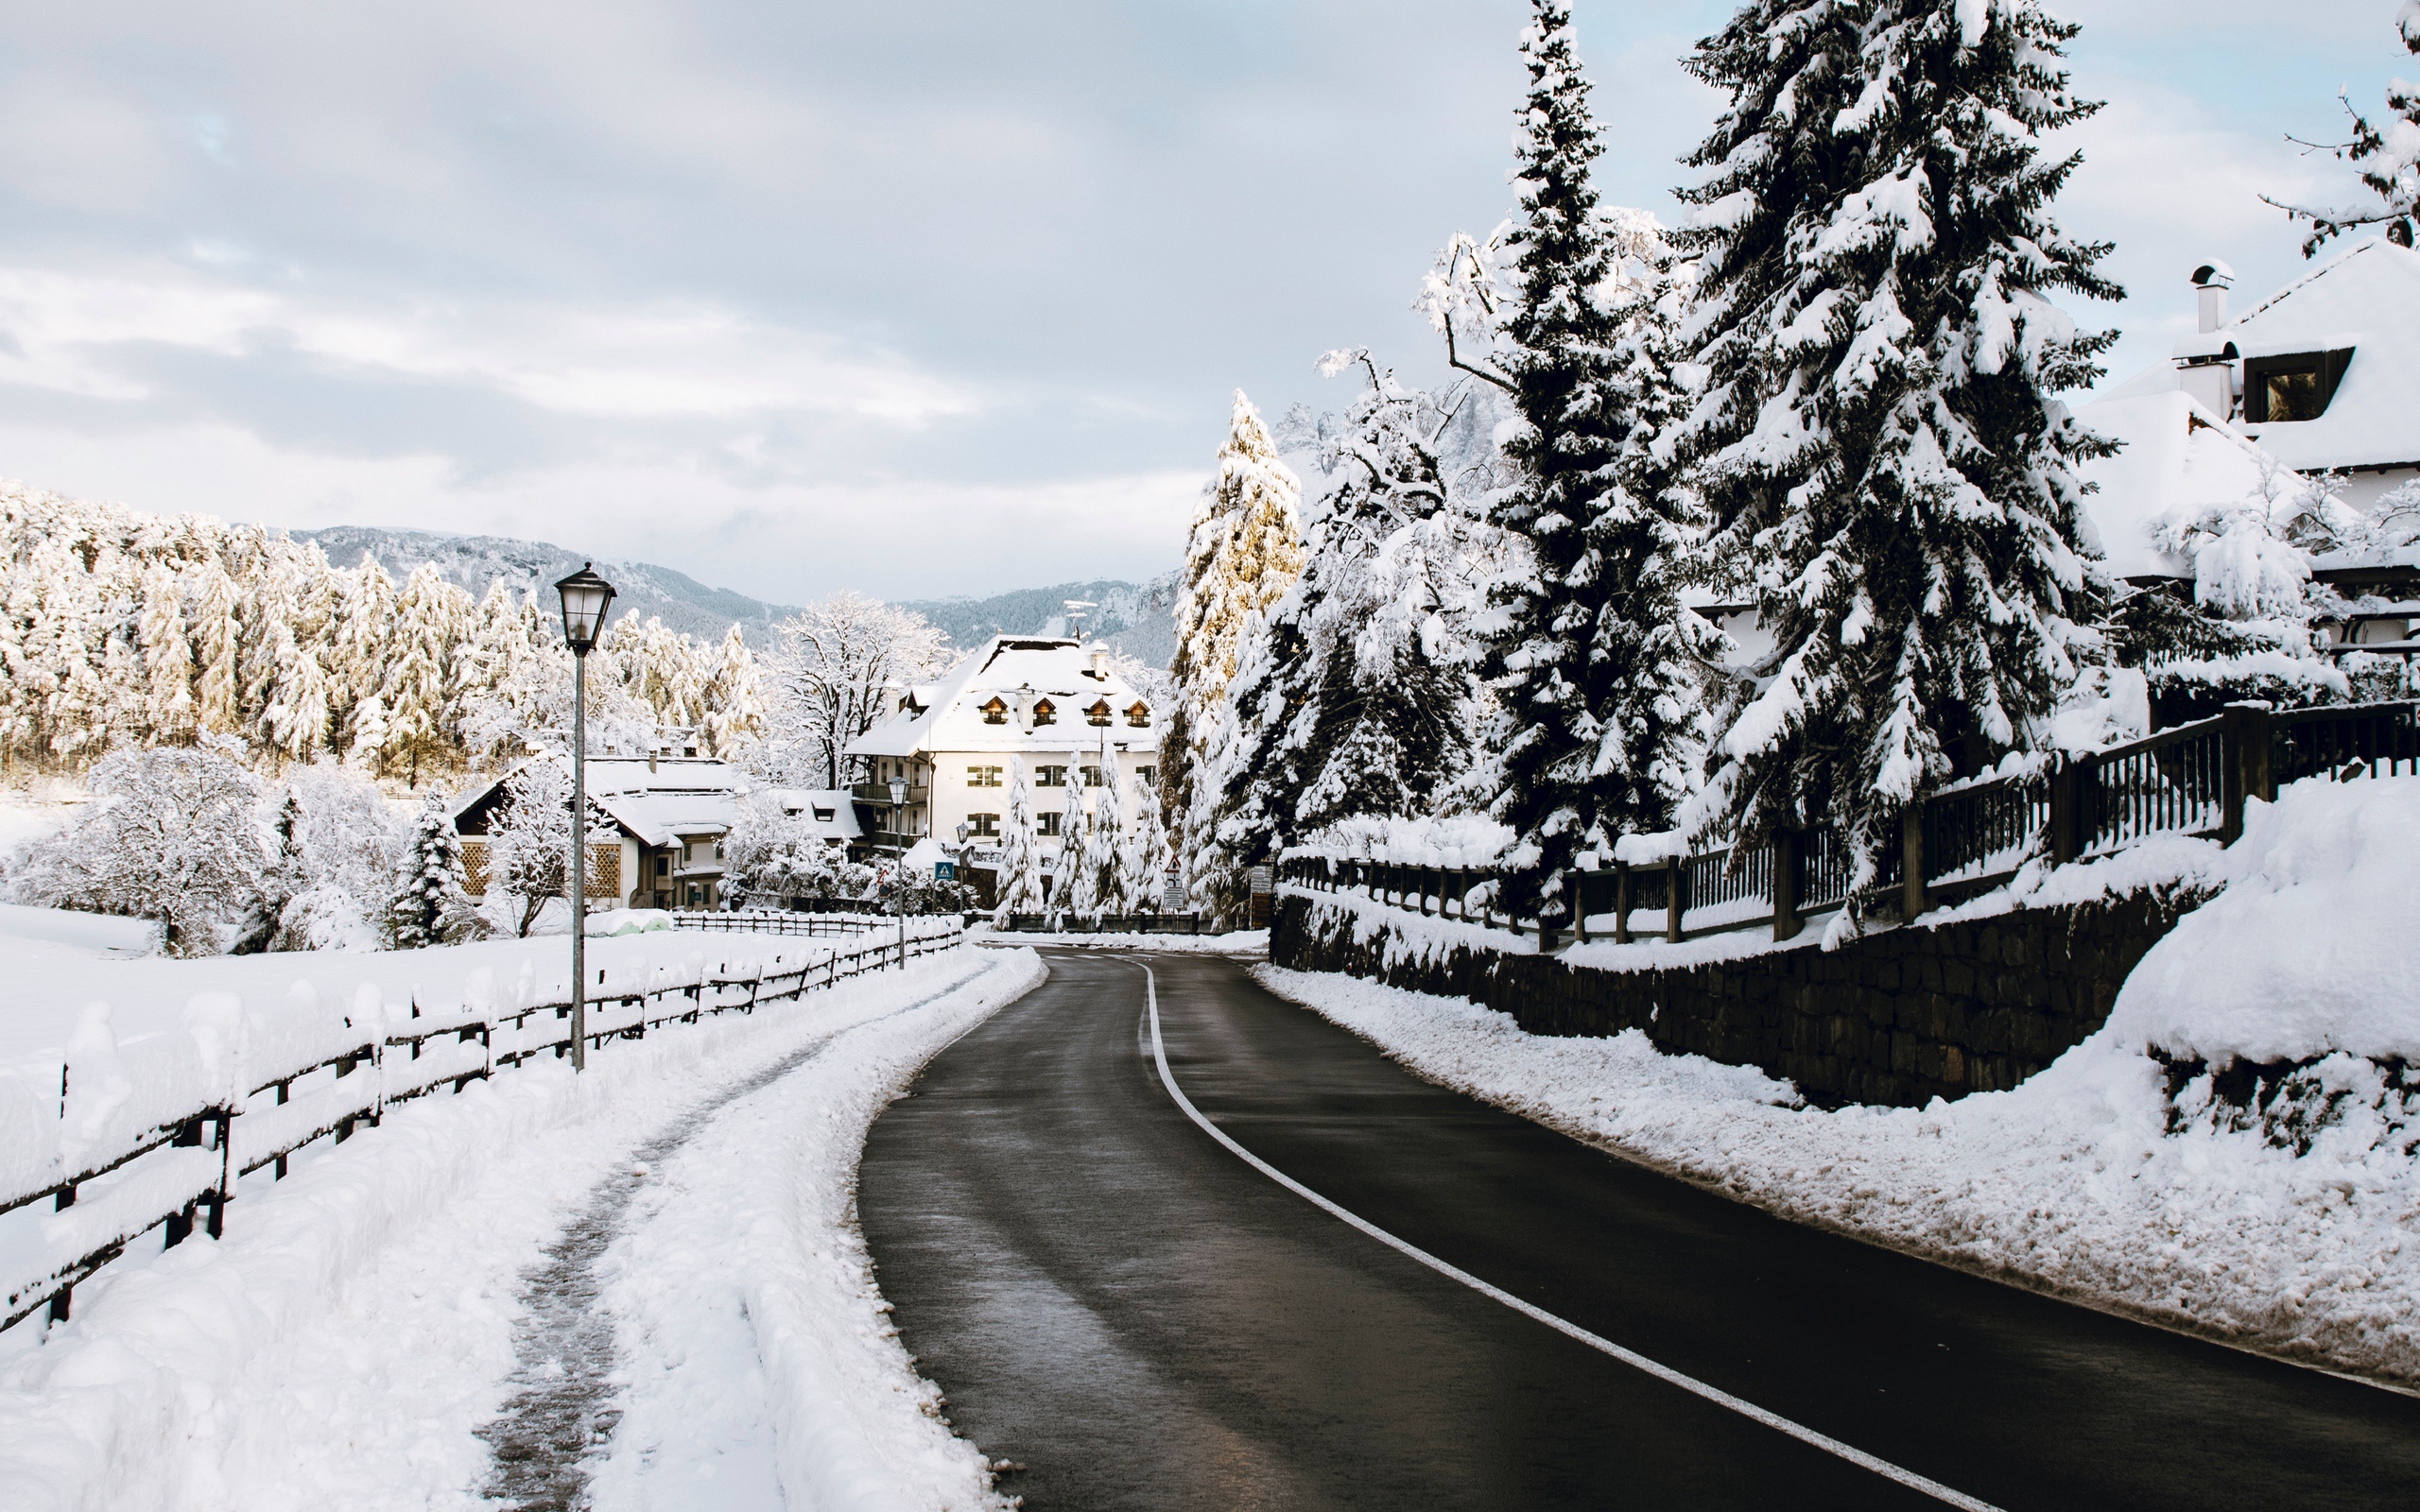 italy, man made, road, nature, snow, town, tyrol, winter 1080p